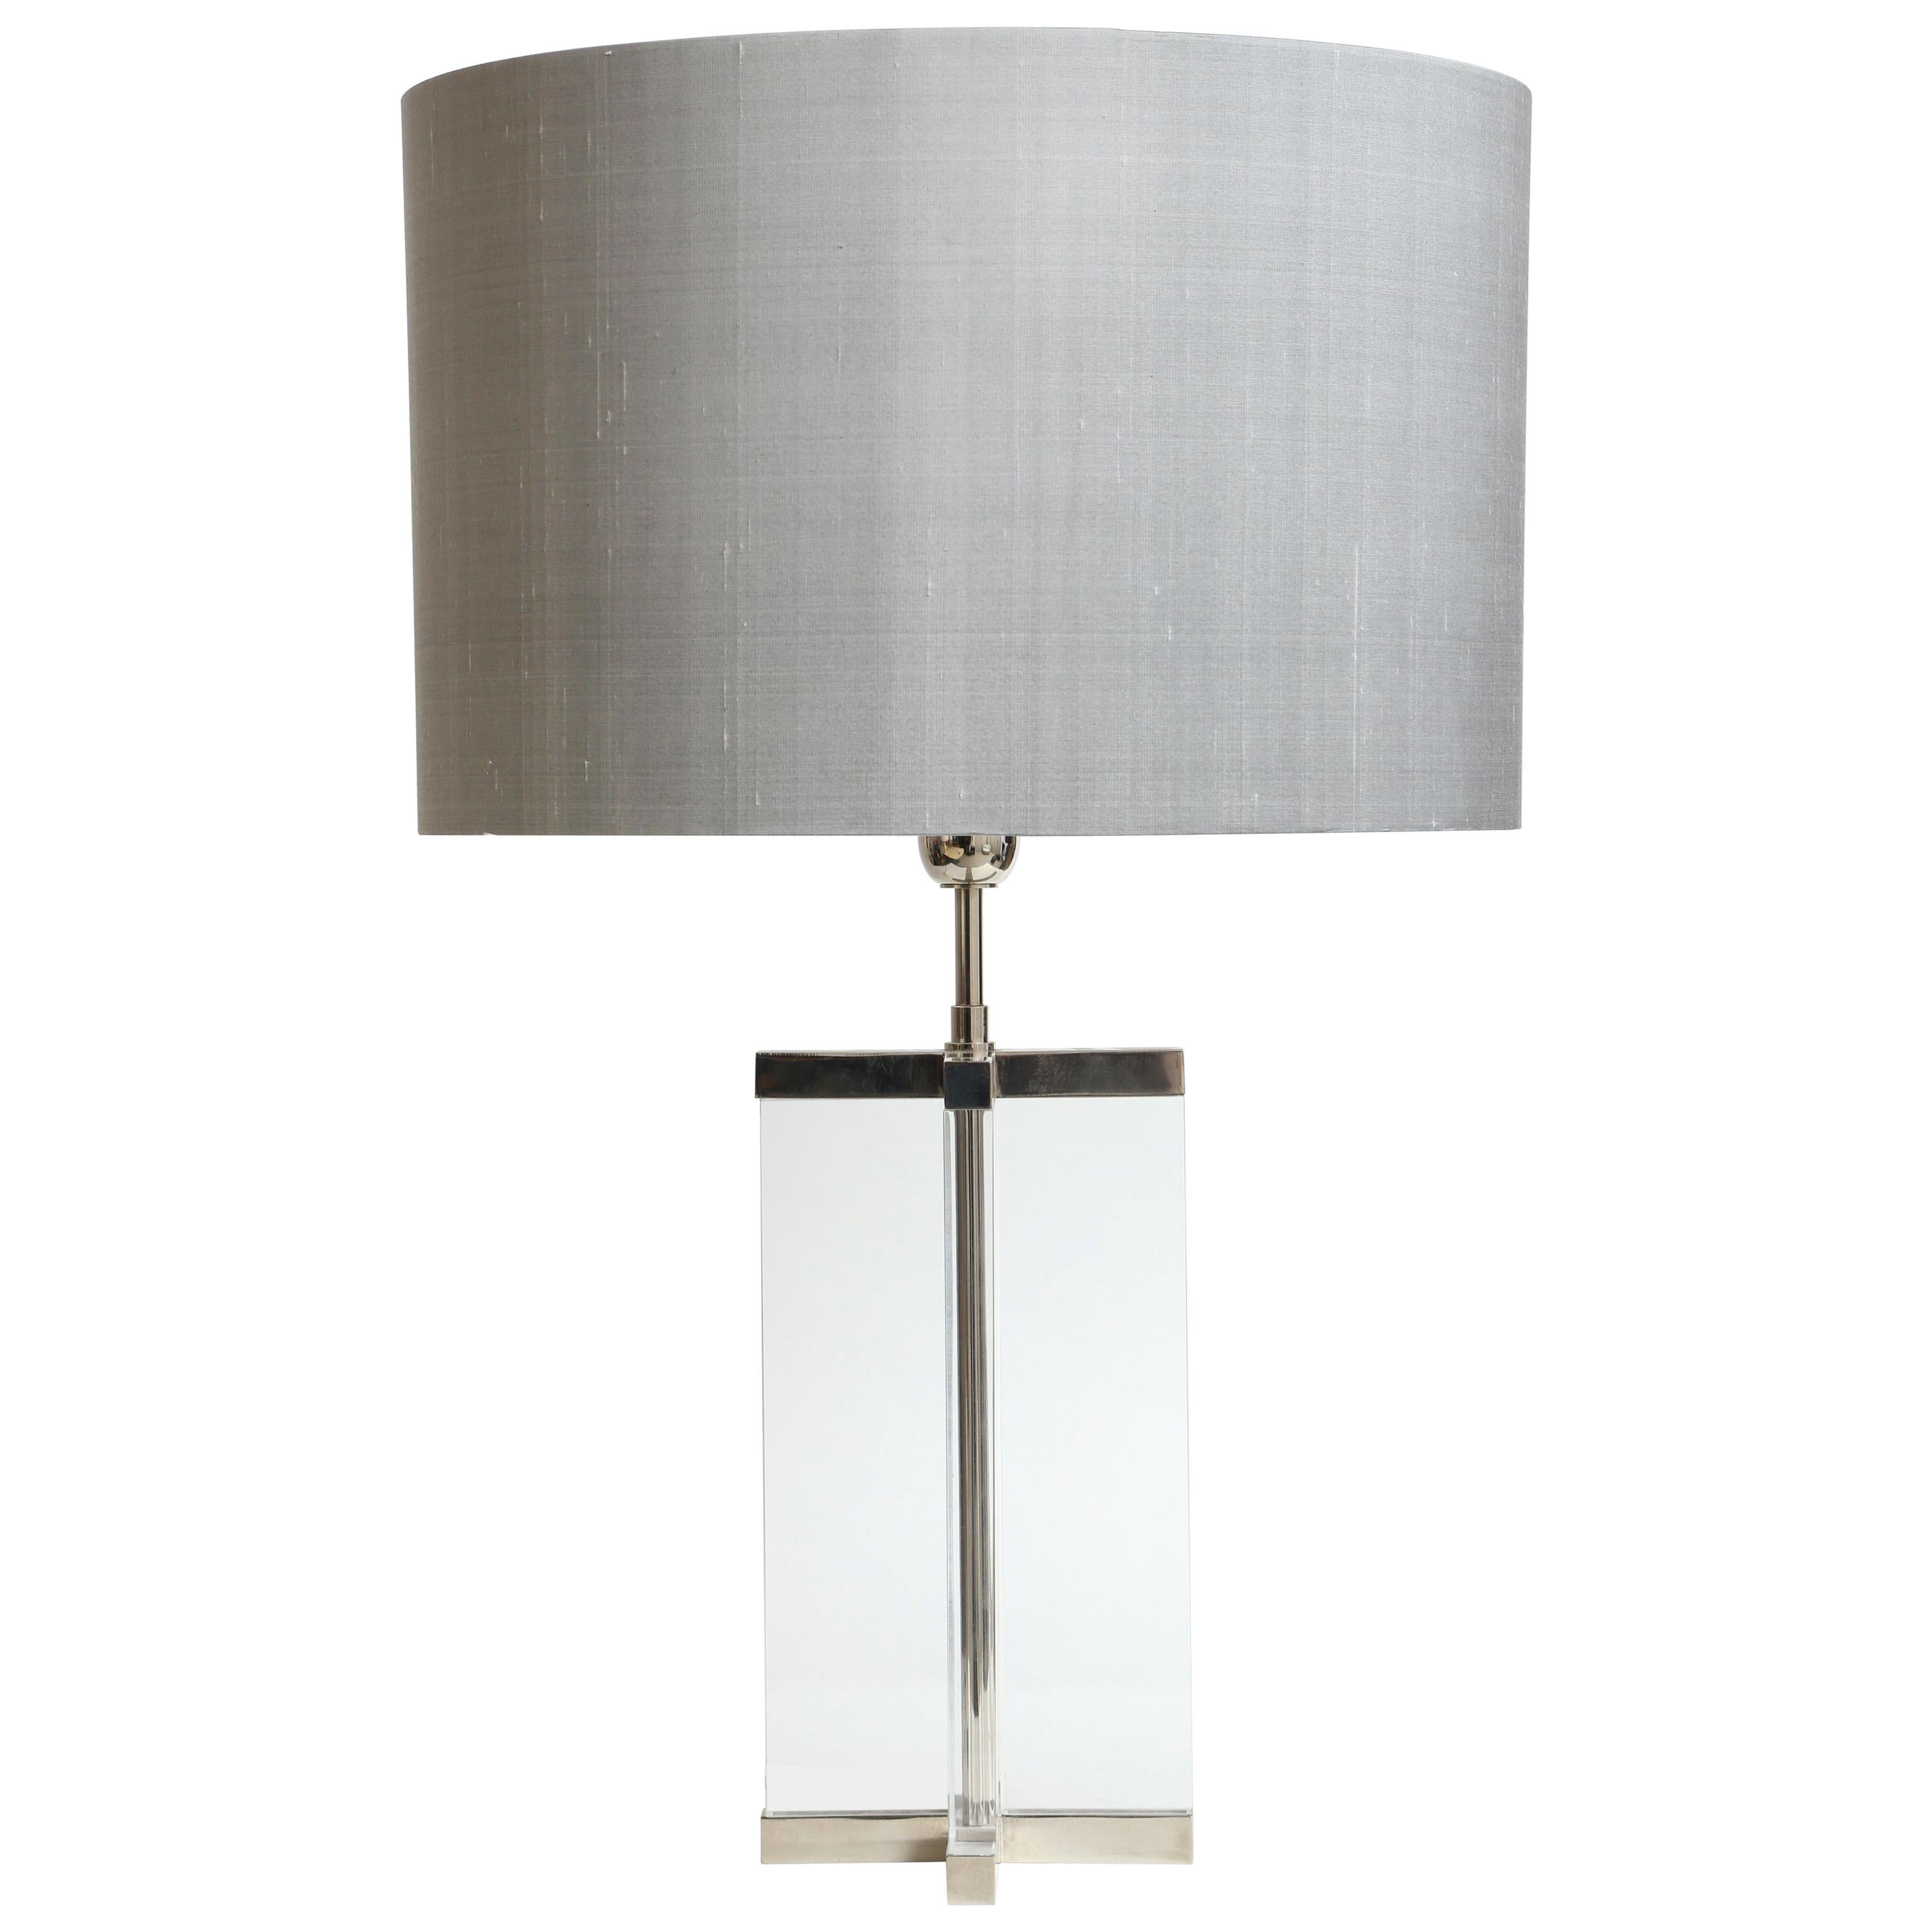 Hotel Table Lamp by Selezioni Domus, Made in Italy For Sale